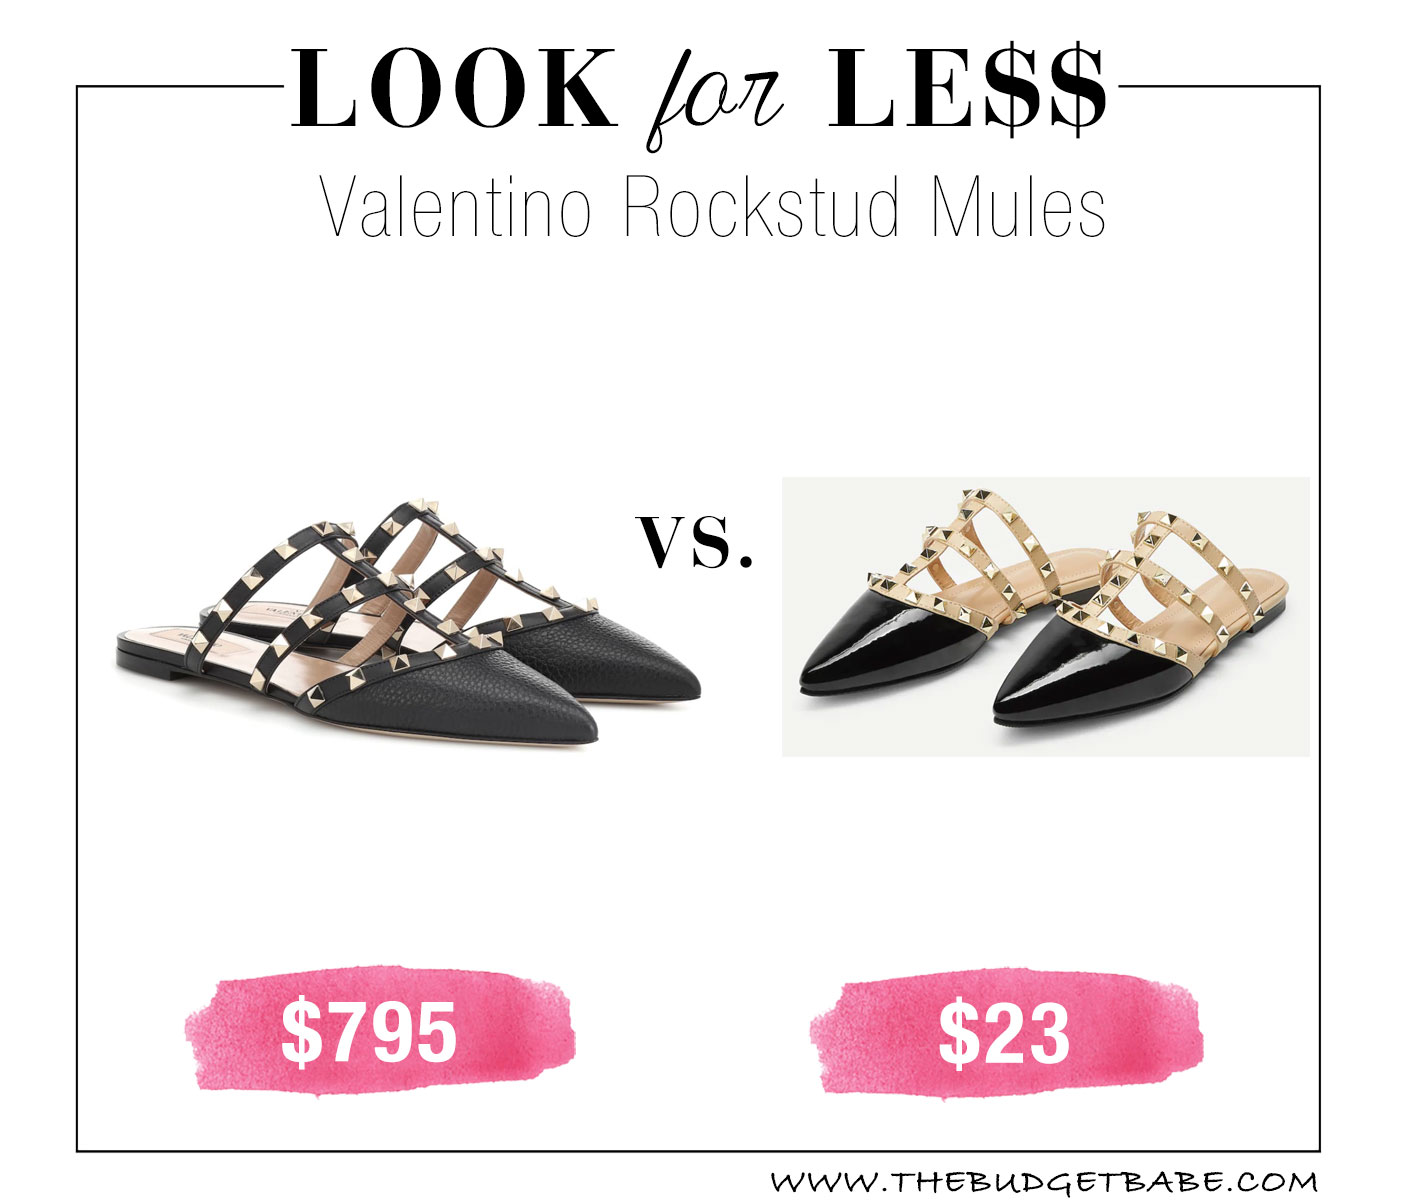 Valentino Rockstud Mules Look for Less